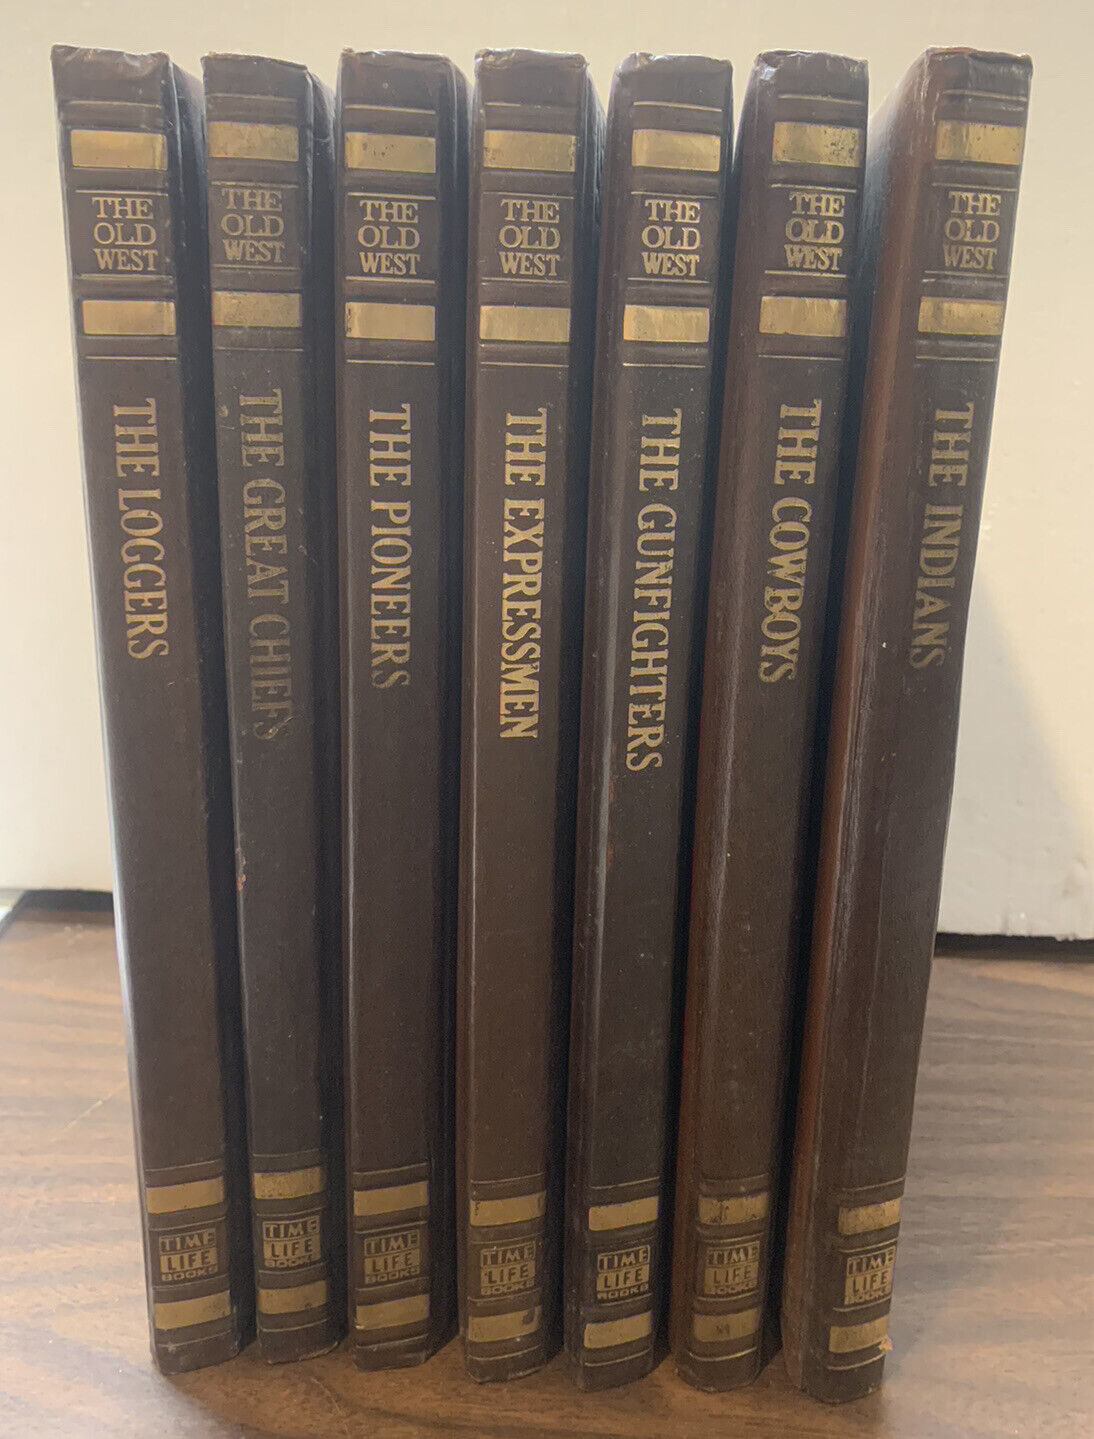 1976-1979 OLD WEST Books (Lot of 7) Time Life (MH79)